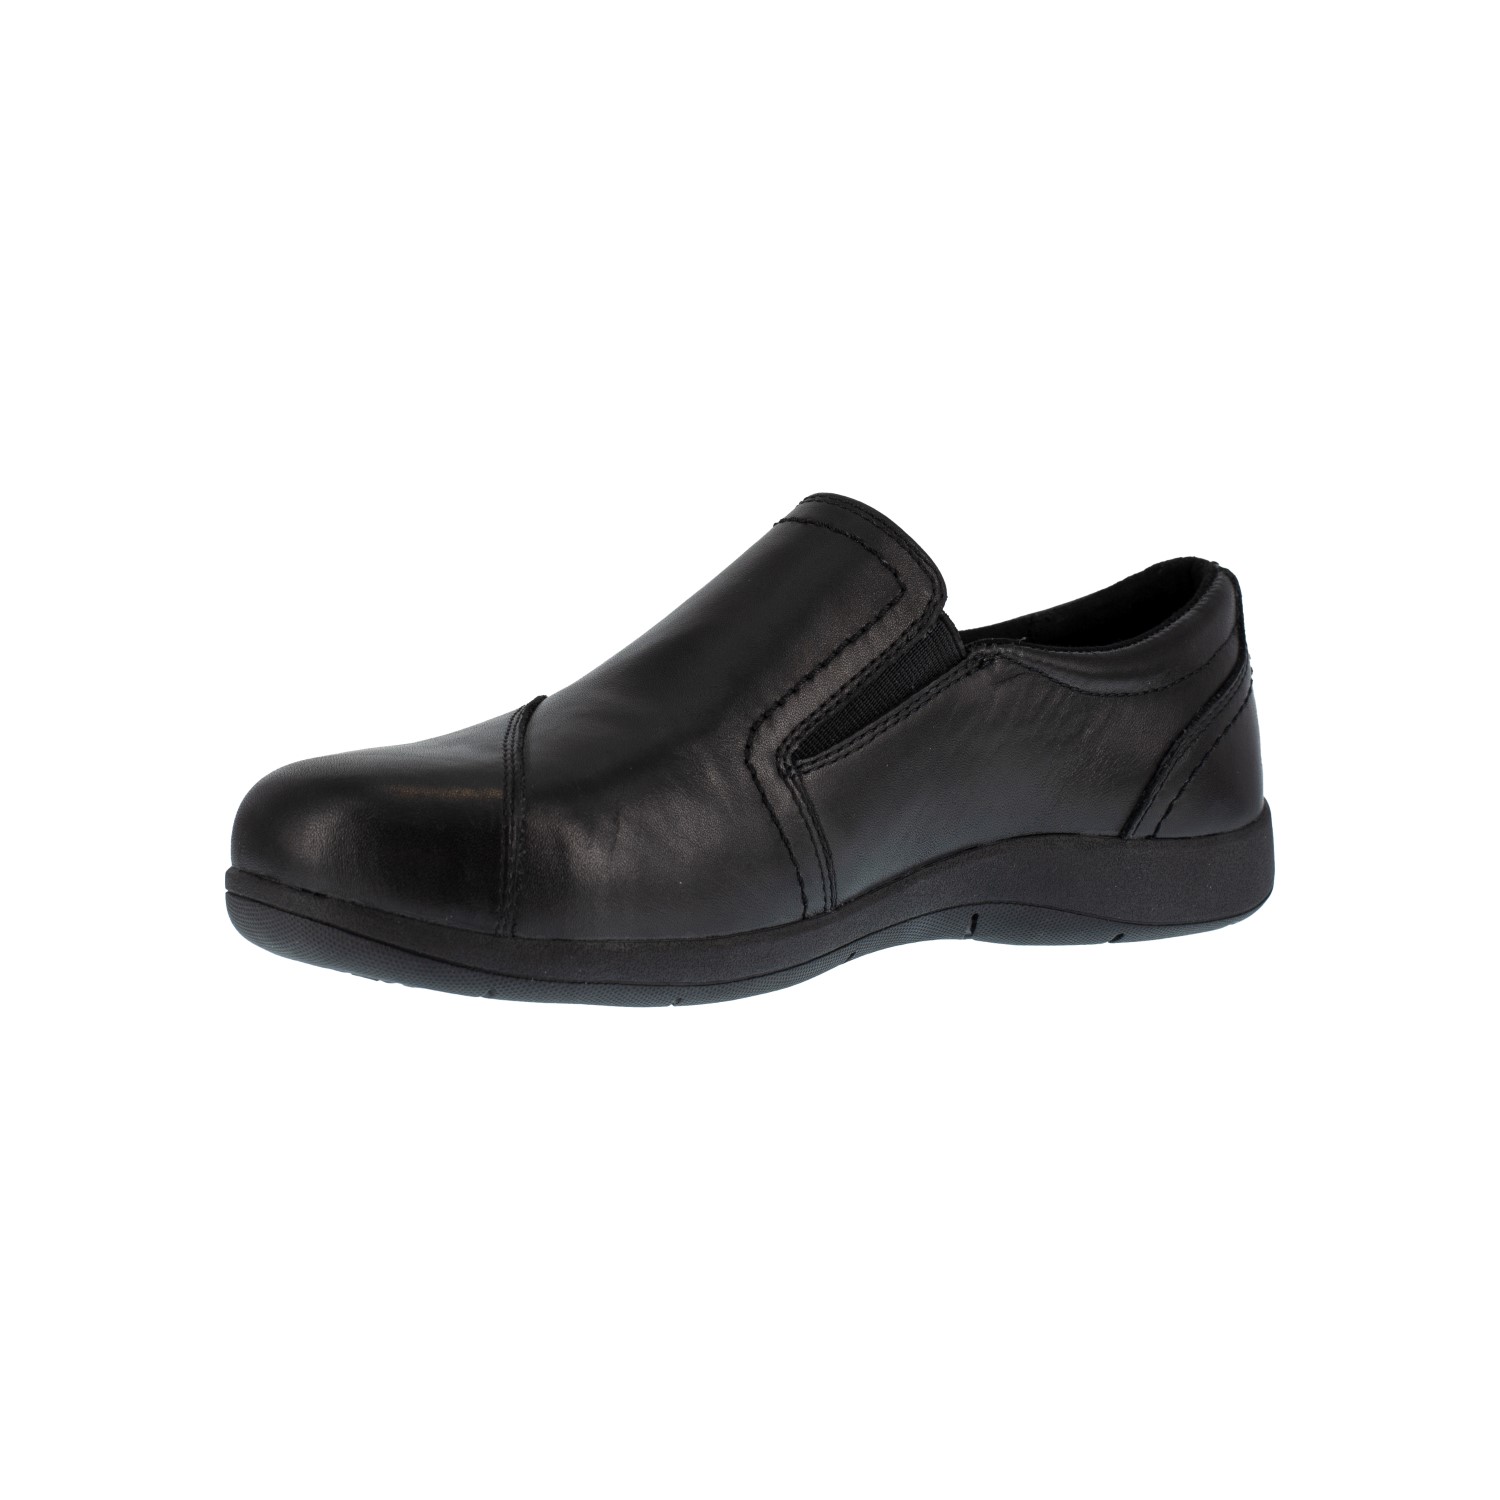 Total 75+ imagen rockport shoes for women - Abzlocal.mx